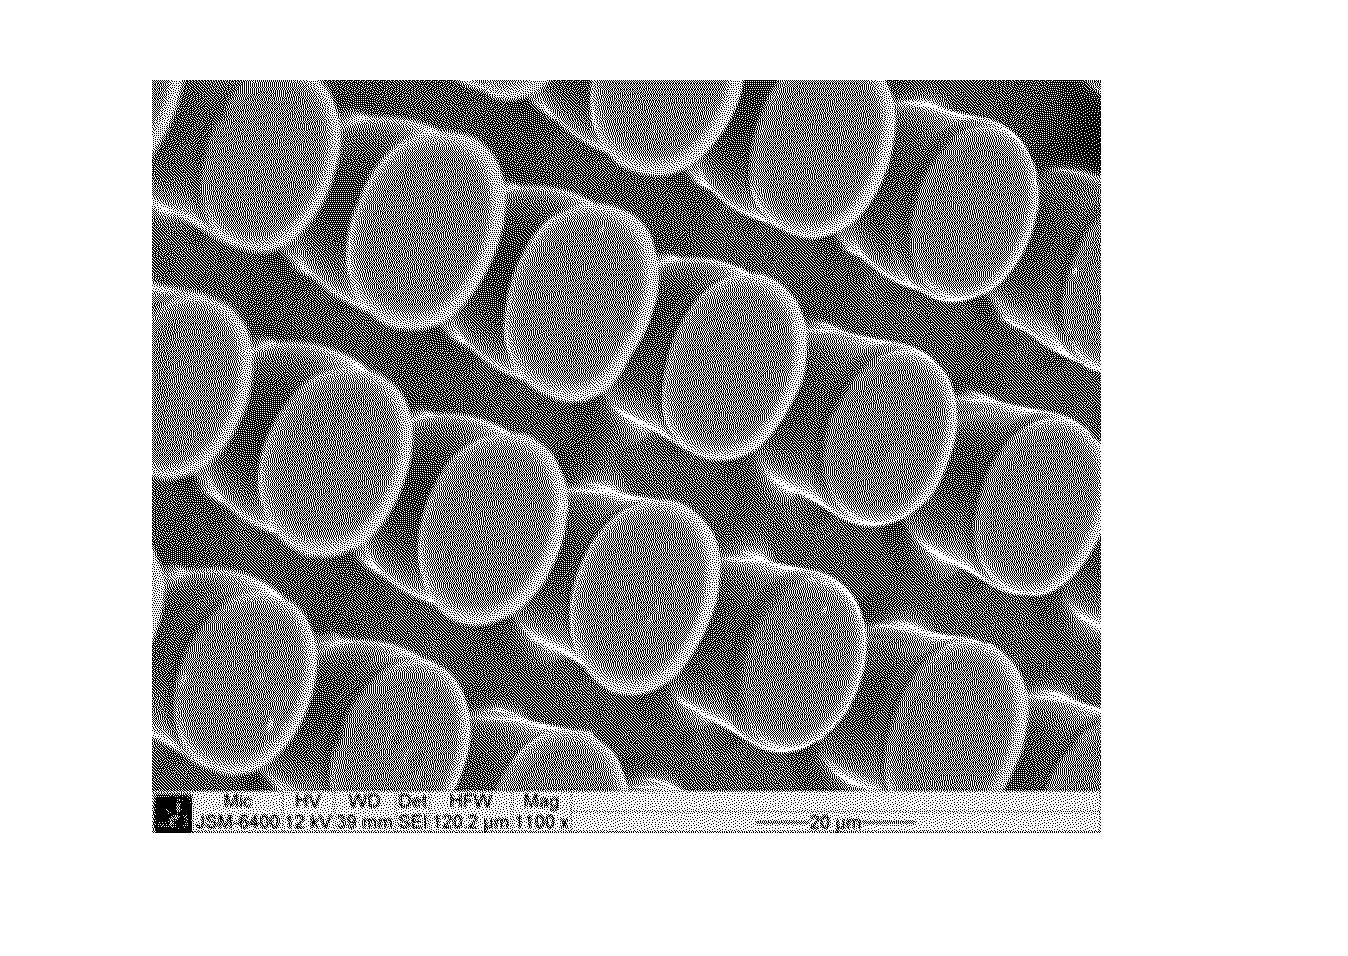 Durable Hydrophilic Dry Adhesives with Hierarchical Structure and Method of Making